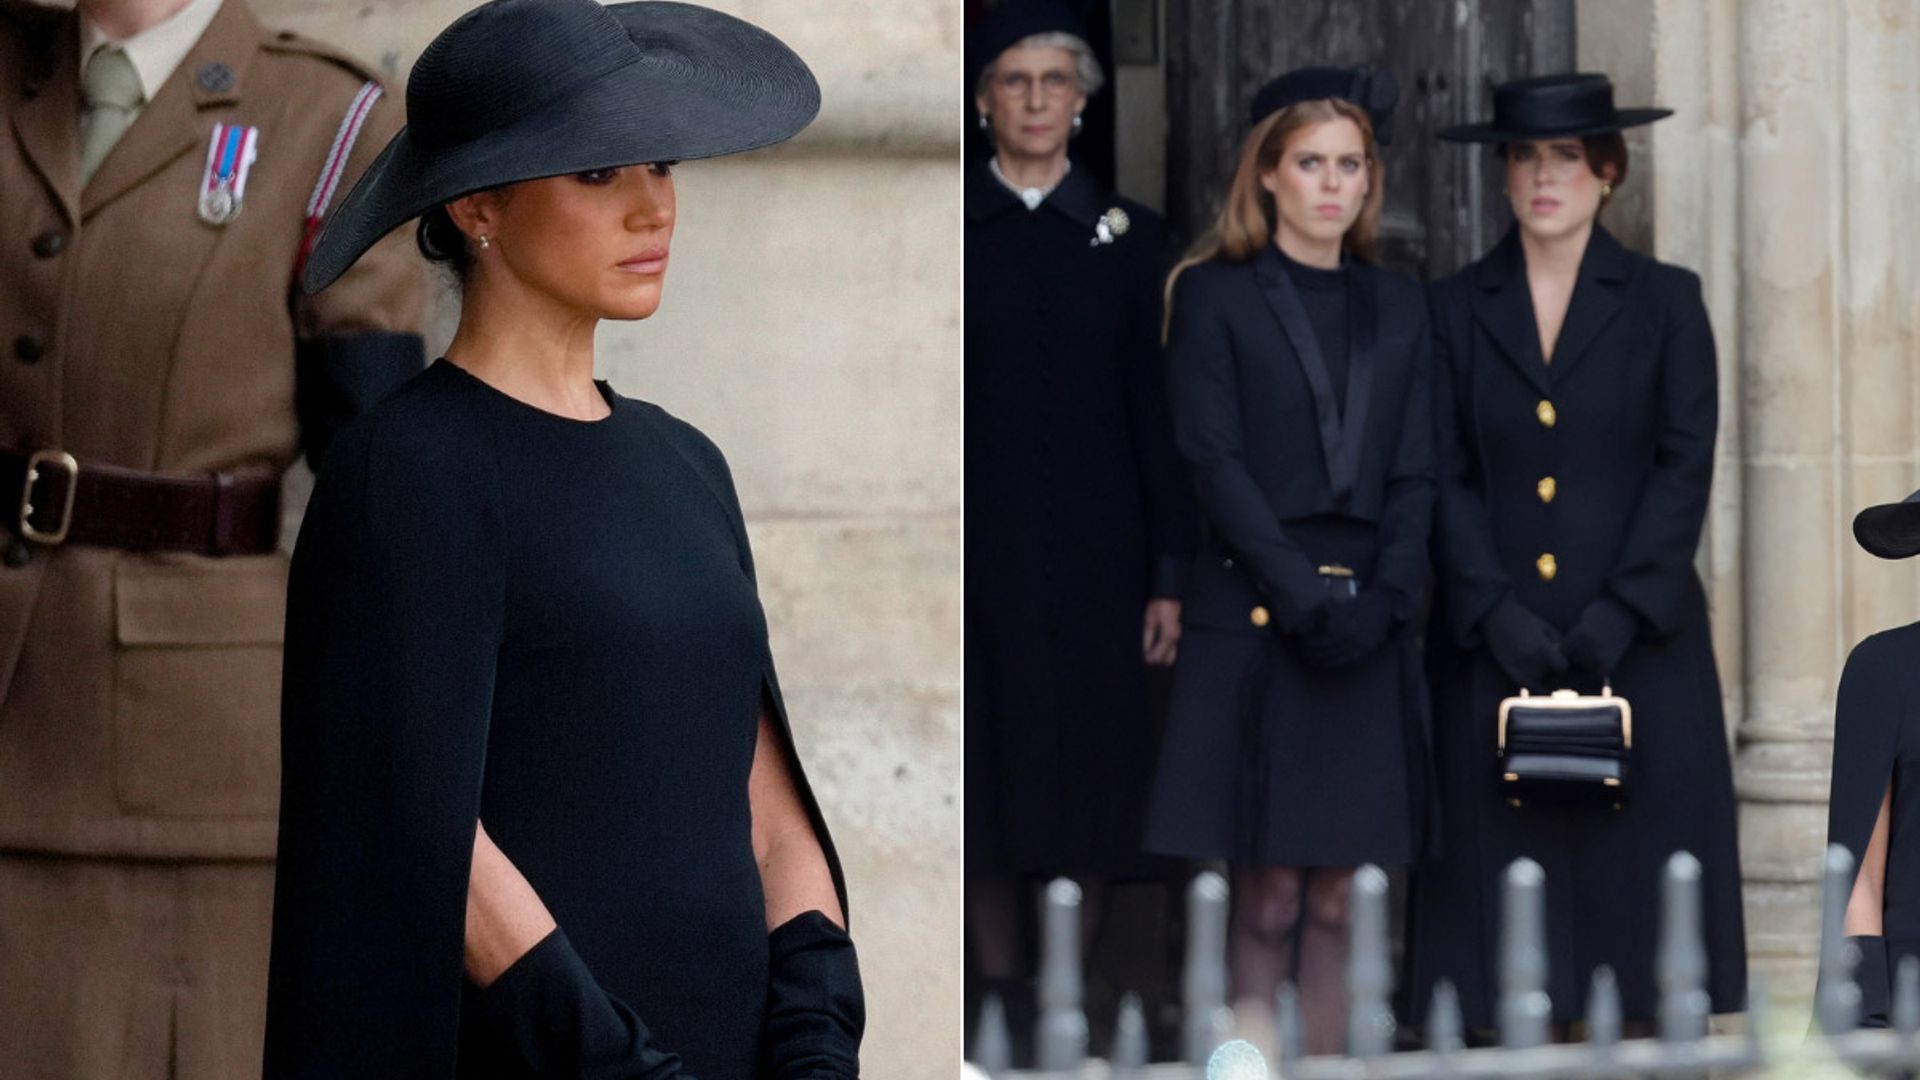 Fashion royalty puts on a final show at Alexander McQueen's funeral